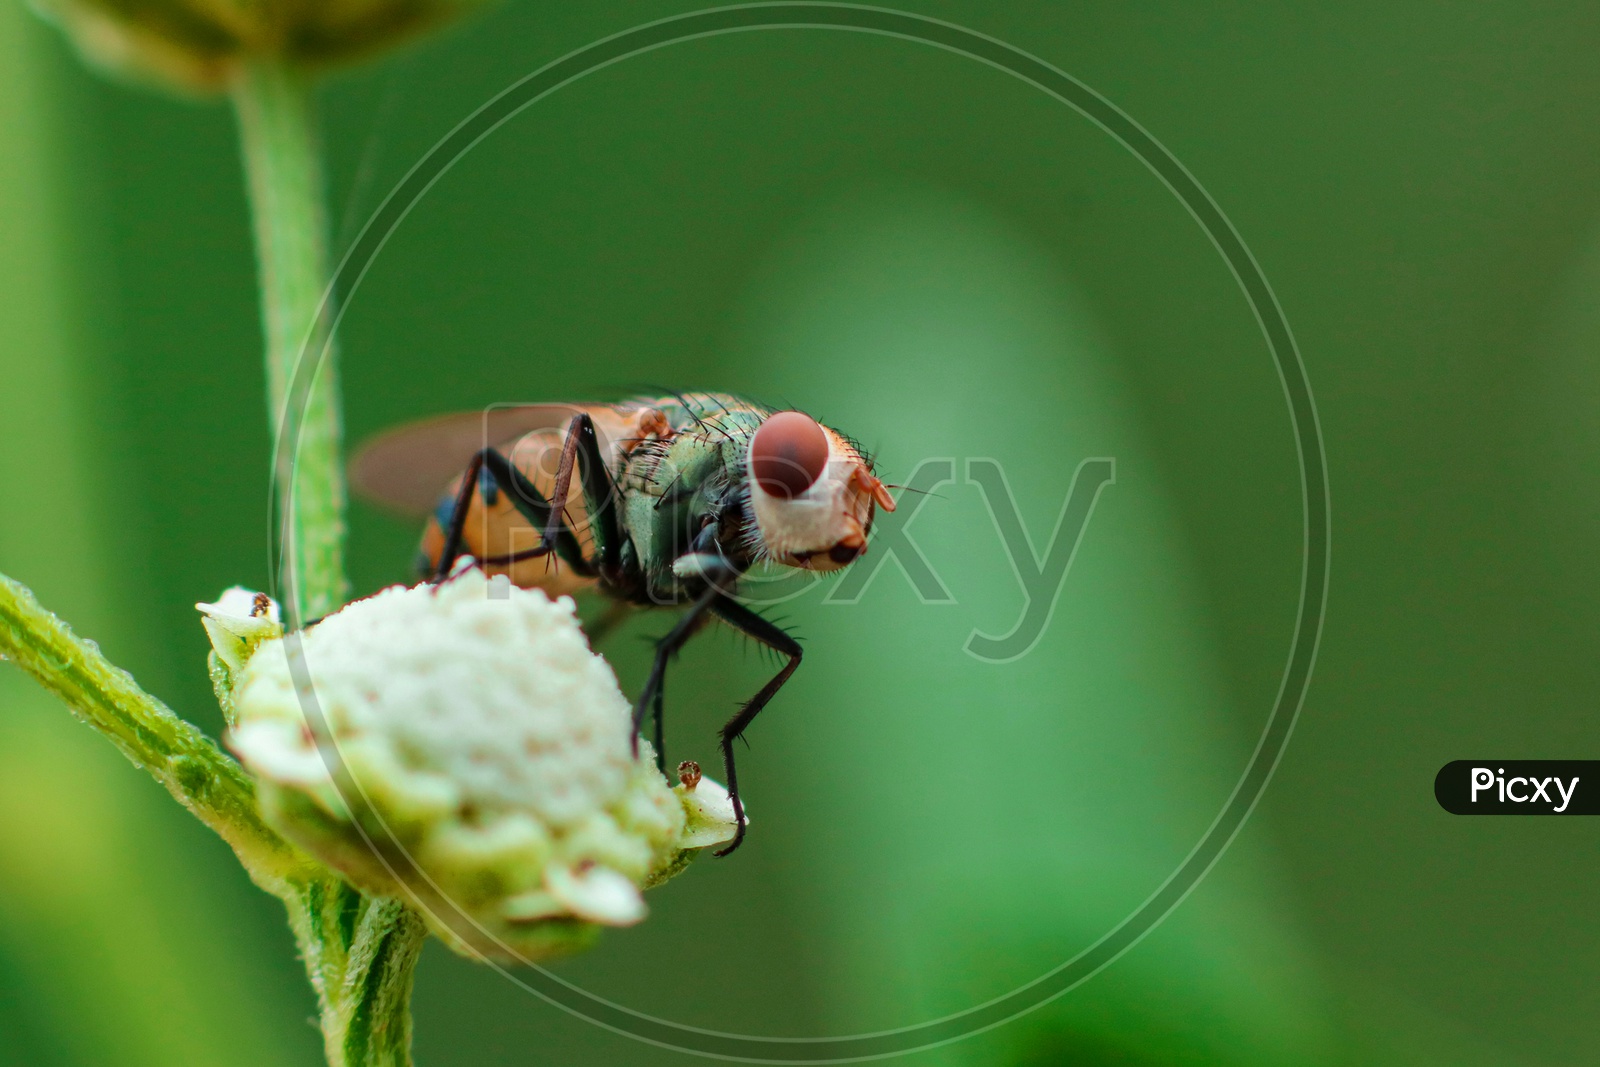 Common Fly